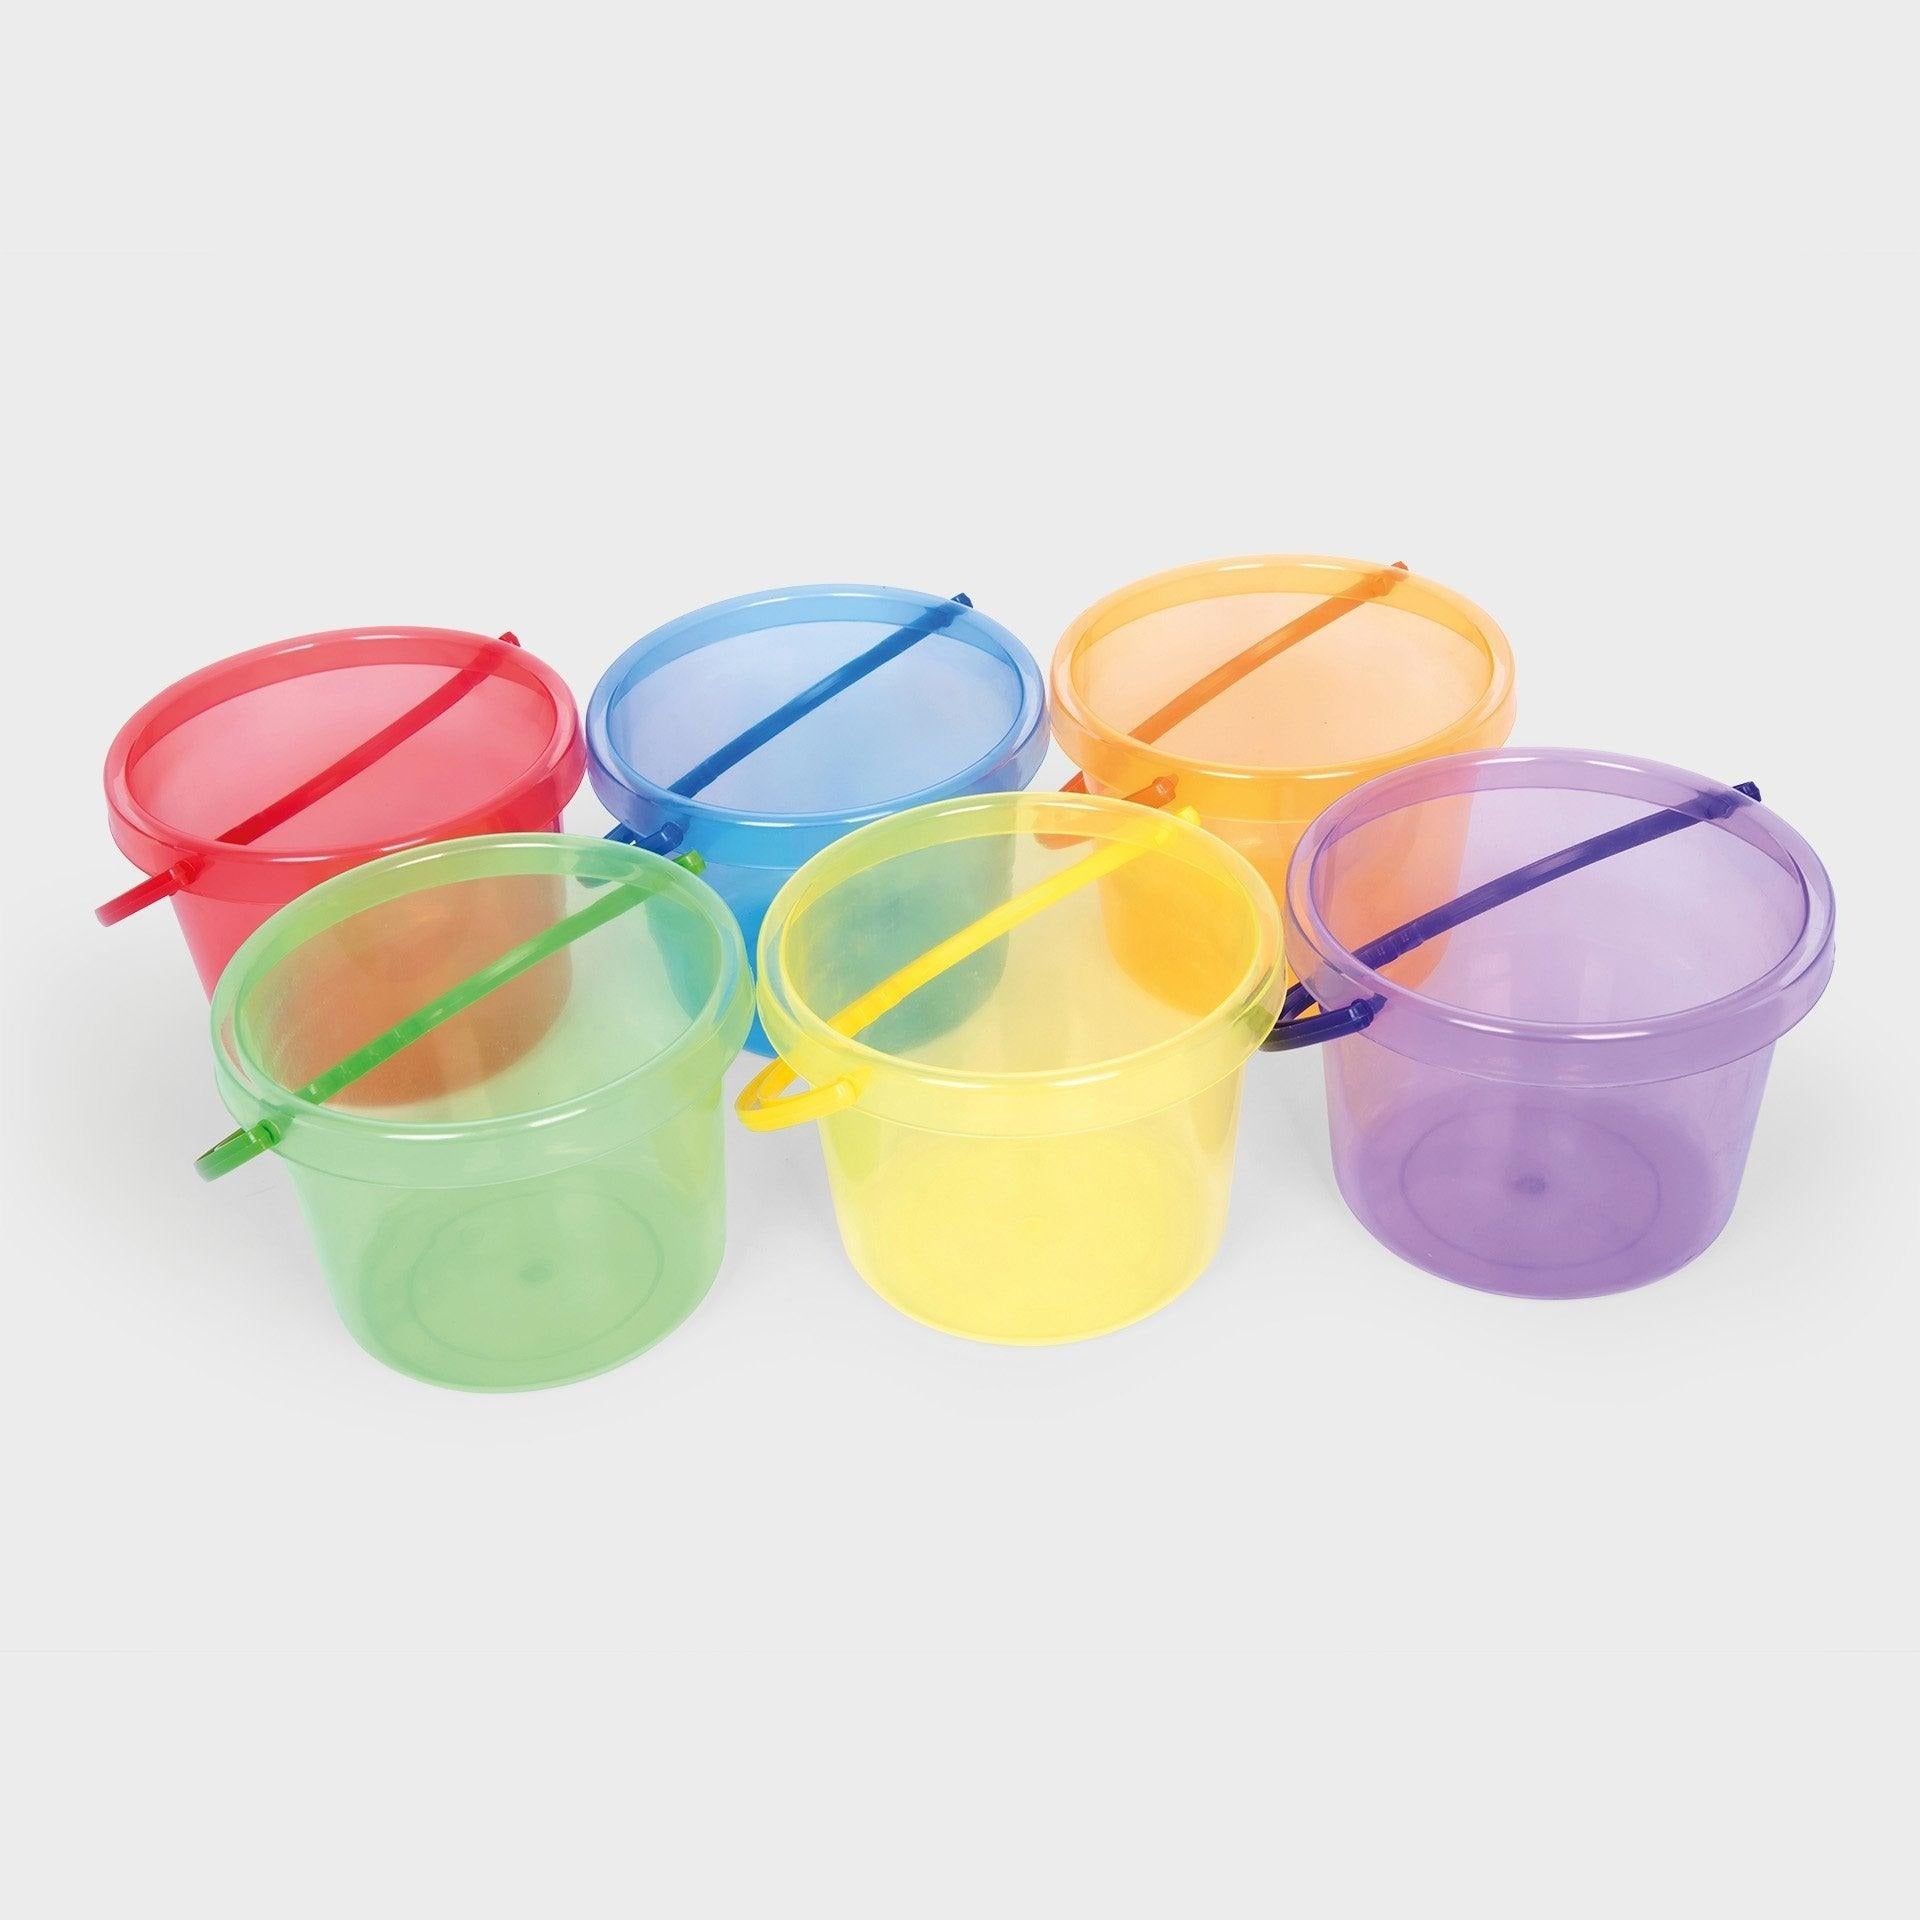 Translucent Colour Bucket Set 6 Pack, Our TickiT® Translucent Colour Bucket Set will provide your child with endless fun as they are the perfect size for little hands to stack and carry them. The Translucent Colour Bucket Set is ideal for messy play, exploring sand and water play, transporting different materials to investigate and for colour mixing and matching. The Translucent Colour Bucket Set includes: 6 buckets in 6 colours (red, orange, yellow, green, blue, purple). The Translucent Colour Bucket Set c